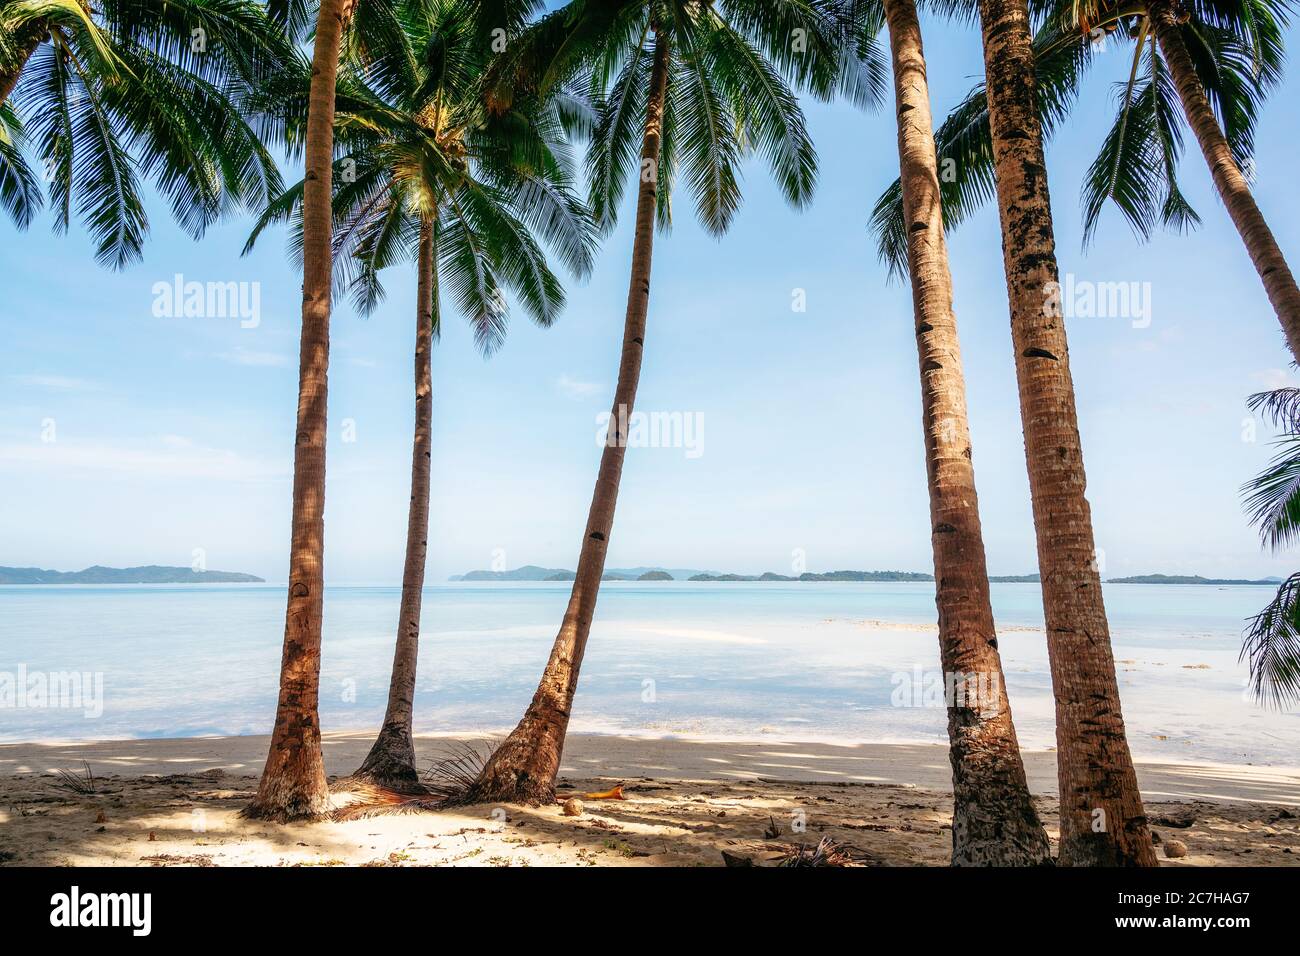 Jungle with palm trees on Coconut Beach in Port Barton, Palawan, Philippines Stock Photo